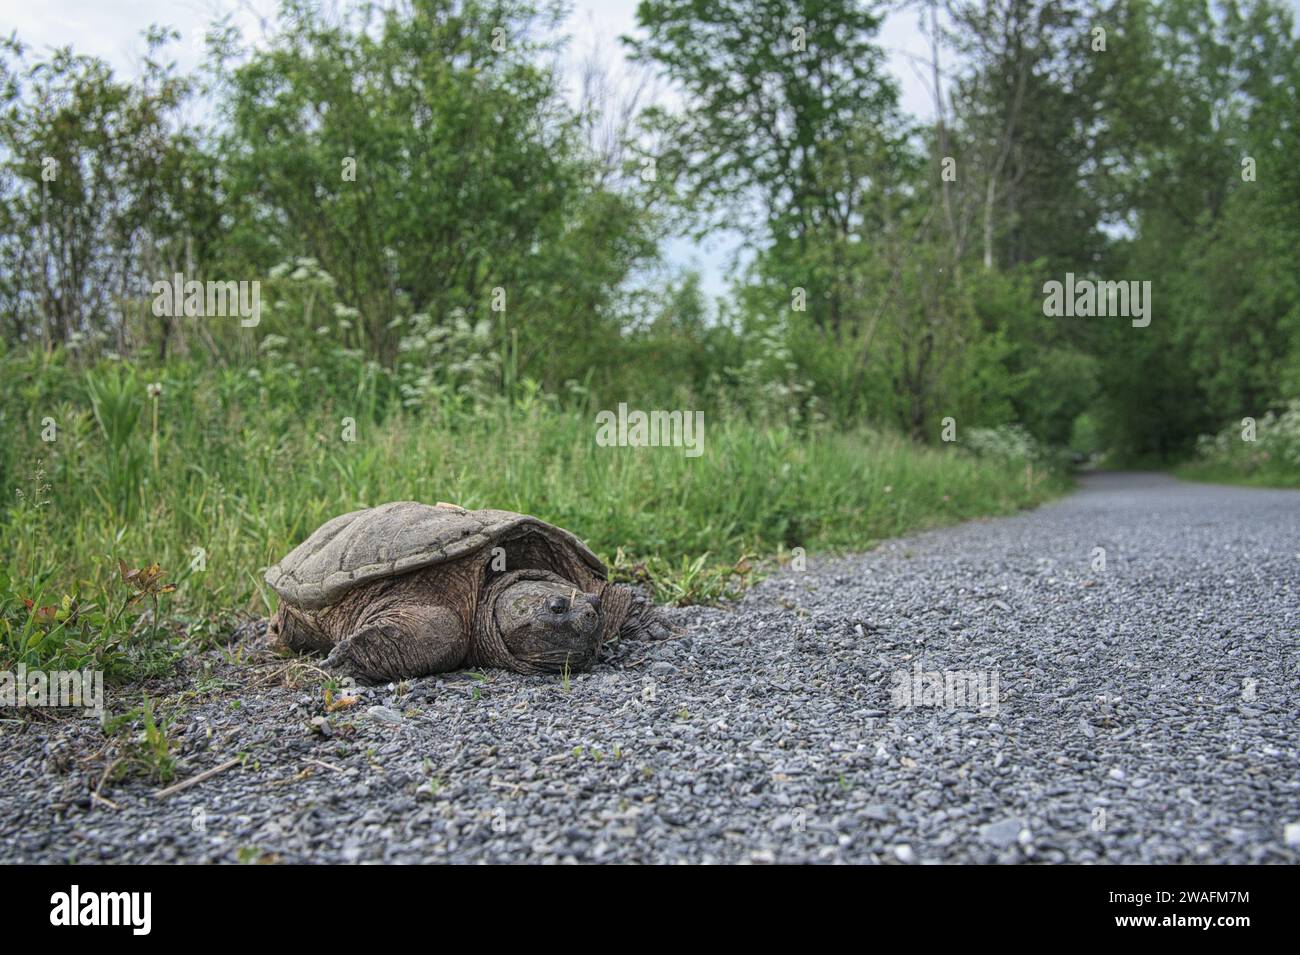 Snapping Turtle in the grass Stock Photo